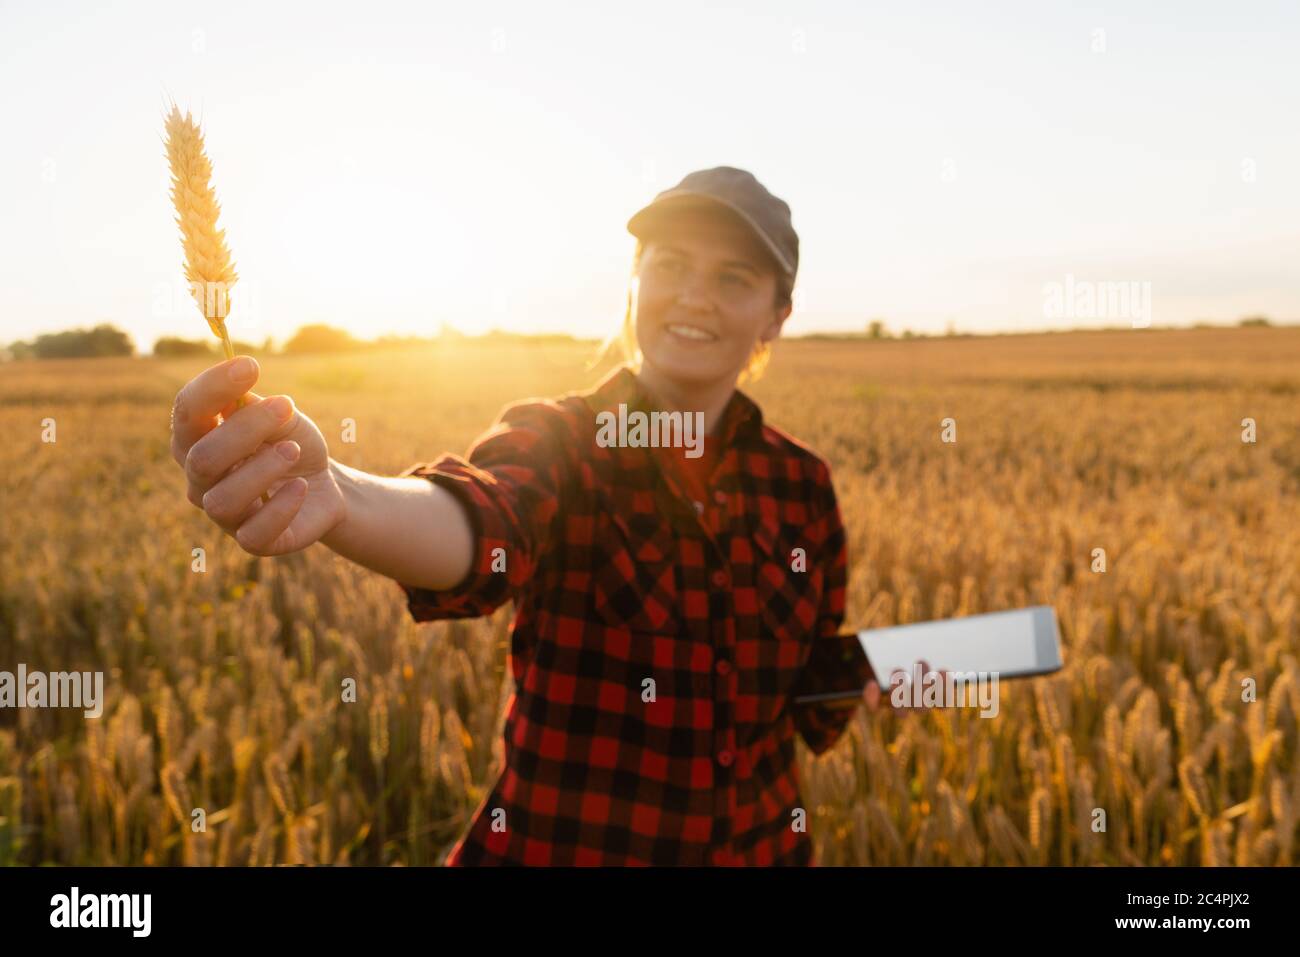 A woman farmer stands in a agricultural field at sunset and looks at an ear of wheat. Stock Photo